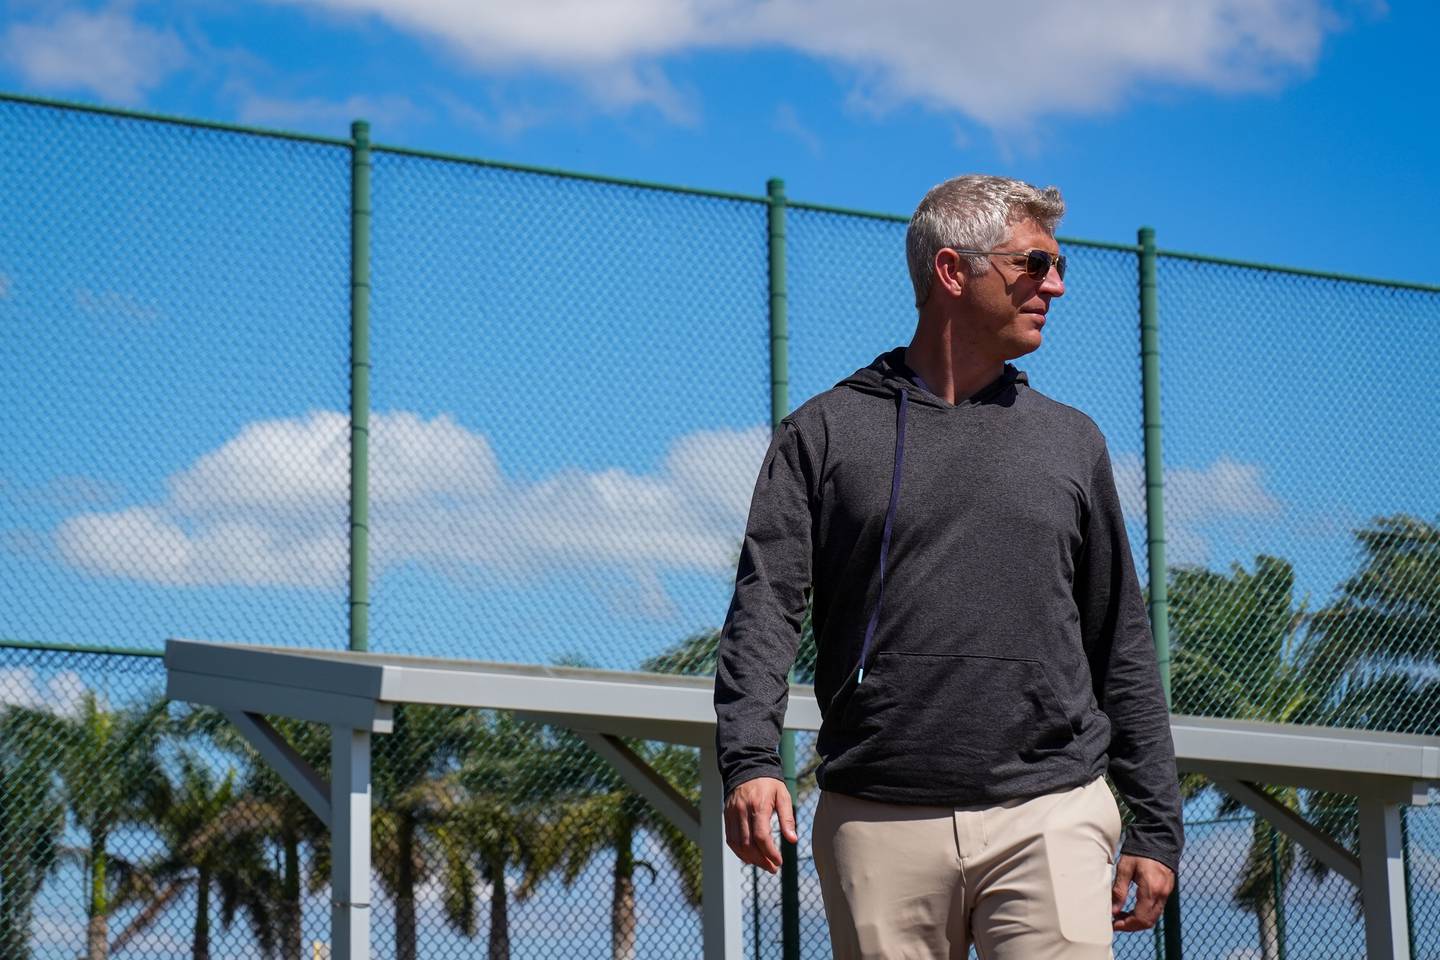 Orioles General Manager Mike Elias walks back toward the clubhouse after practice ends at Ed Smith Stadium in Sarasota on 2/22/23. The Baltimore Orioles’ Spring Training session runs from mid-February through the end of March.